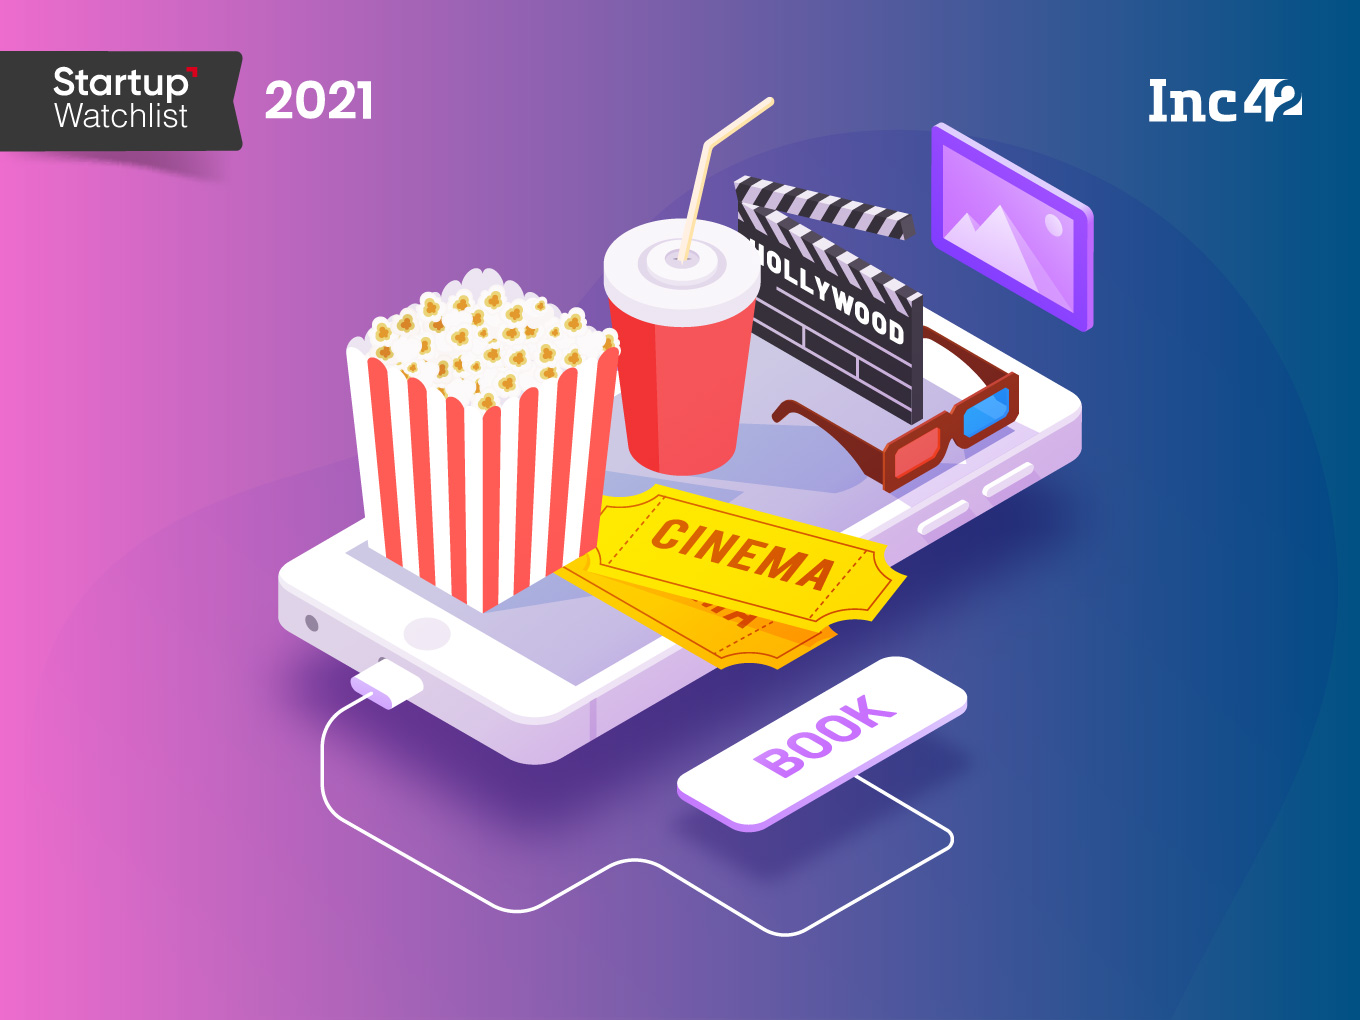 Startup Watchlist: 6 Indian Media & Entertainment Startups To Watch Out For In 2021